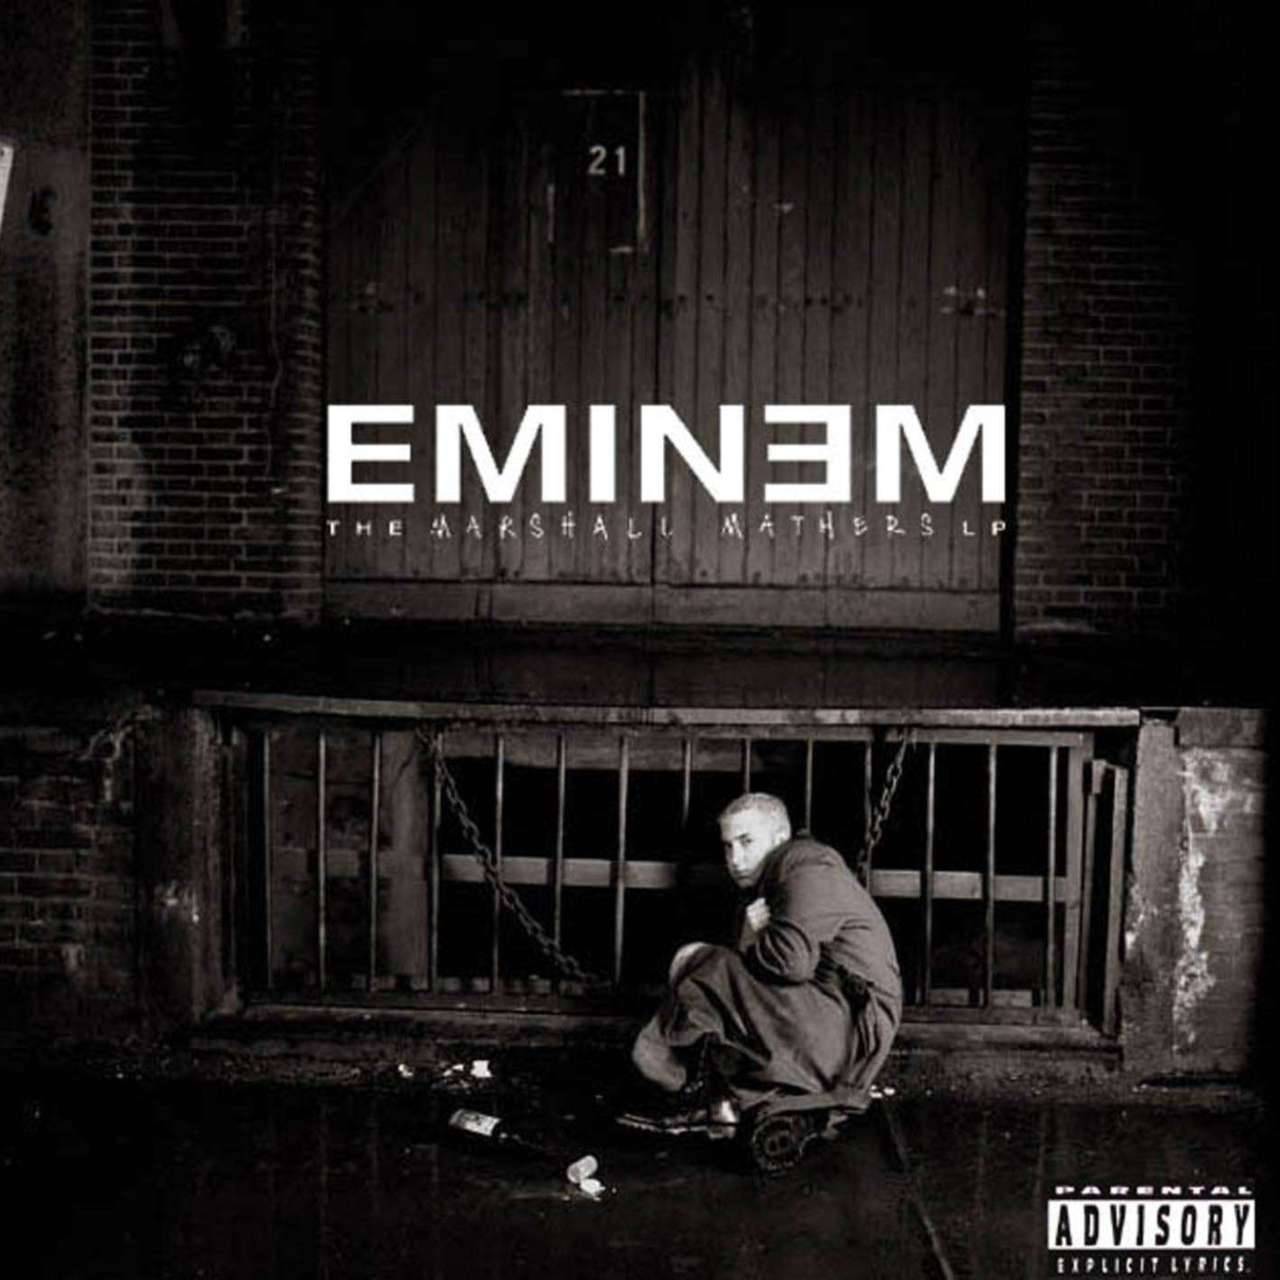 BACK IN THE DAY |5/23/00| Eminem releases his third album, The Marshall Mathers LP,